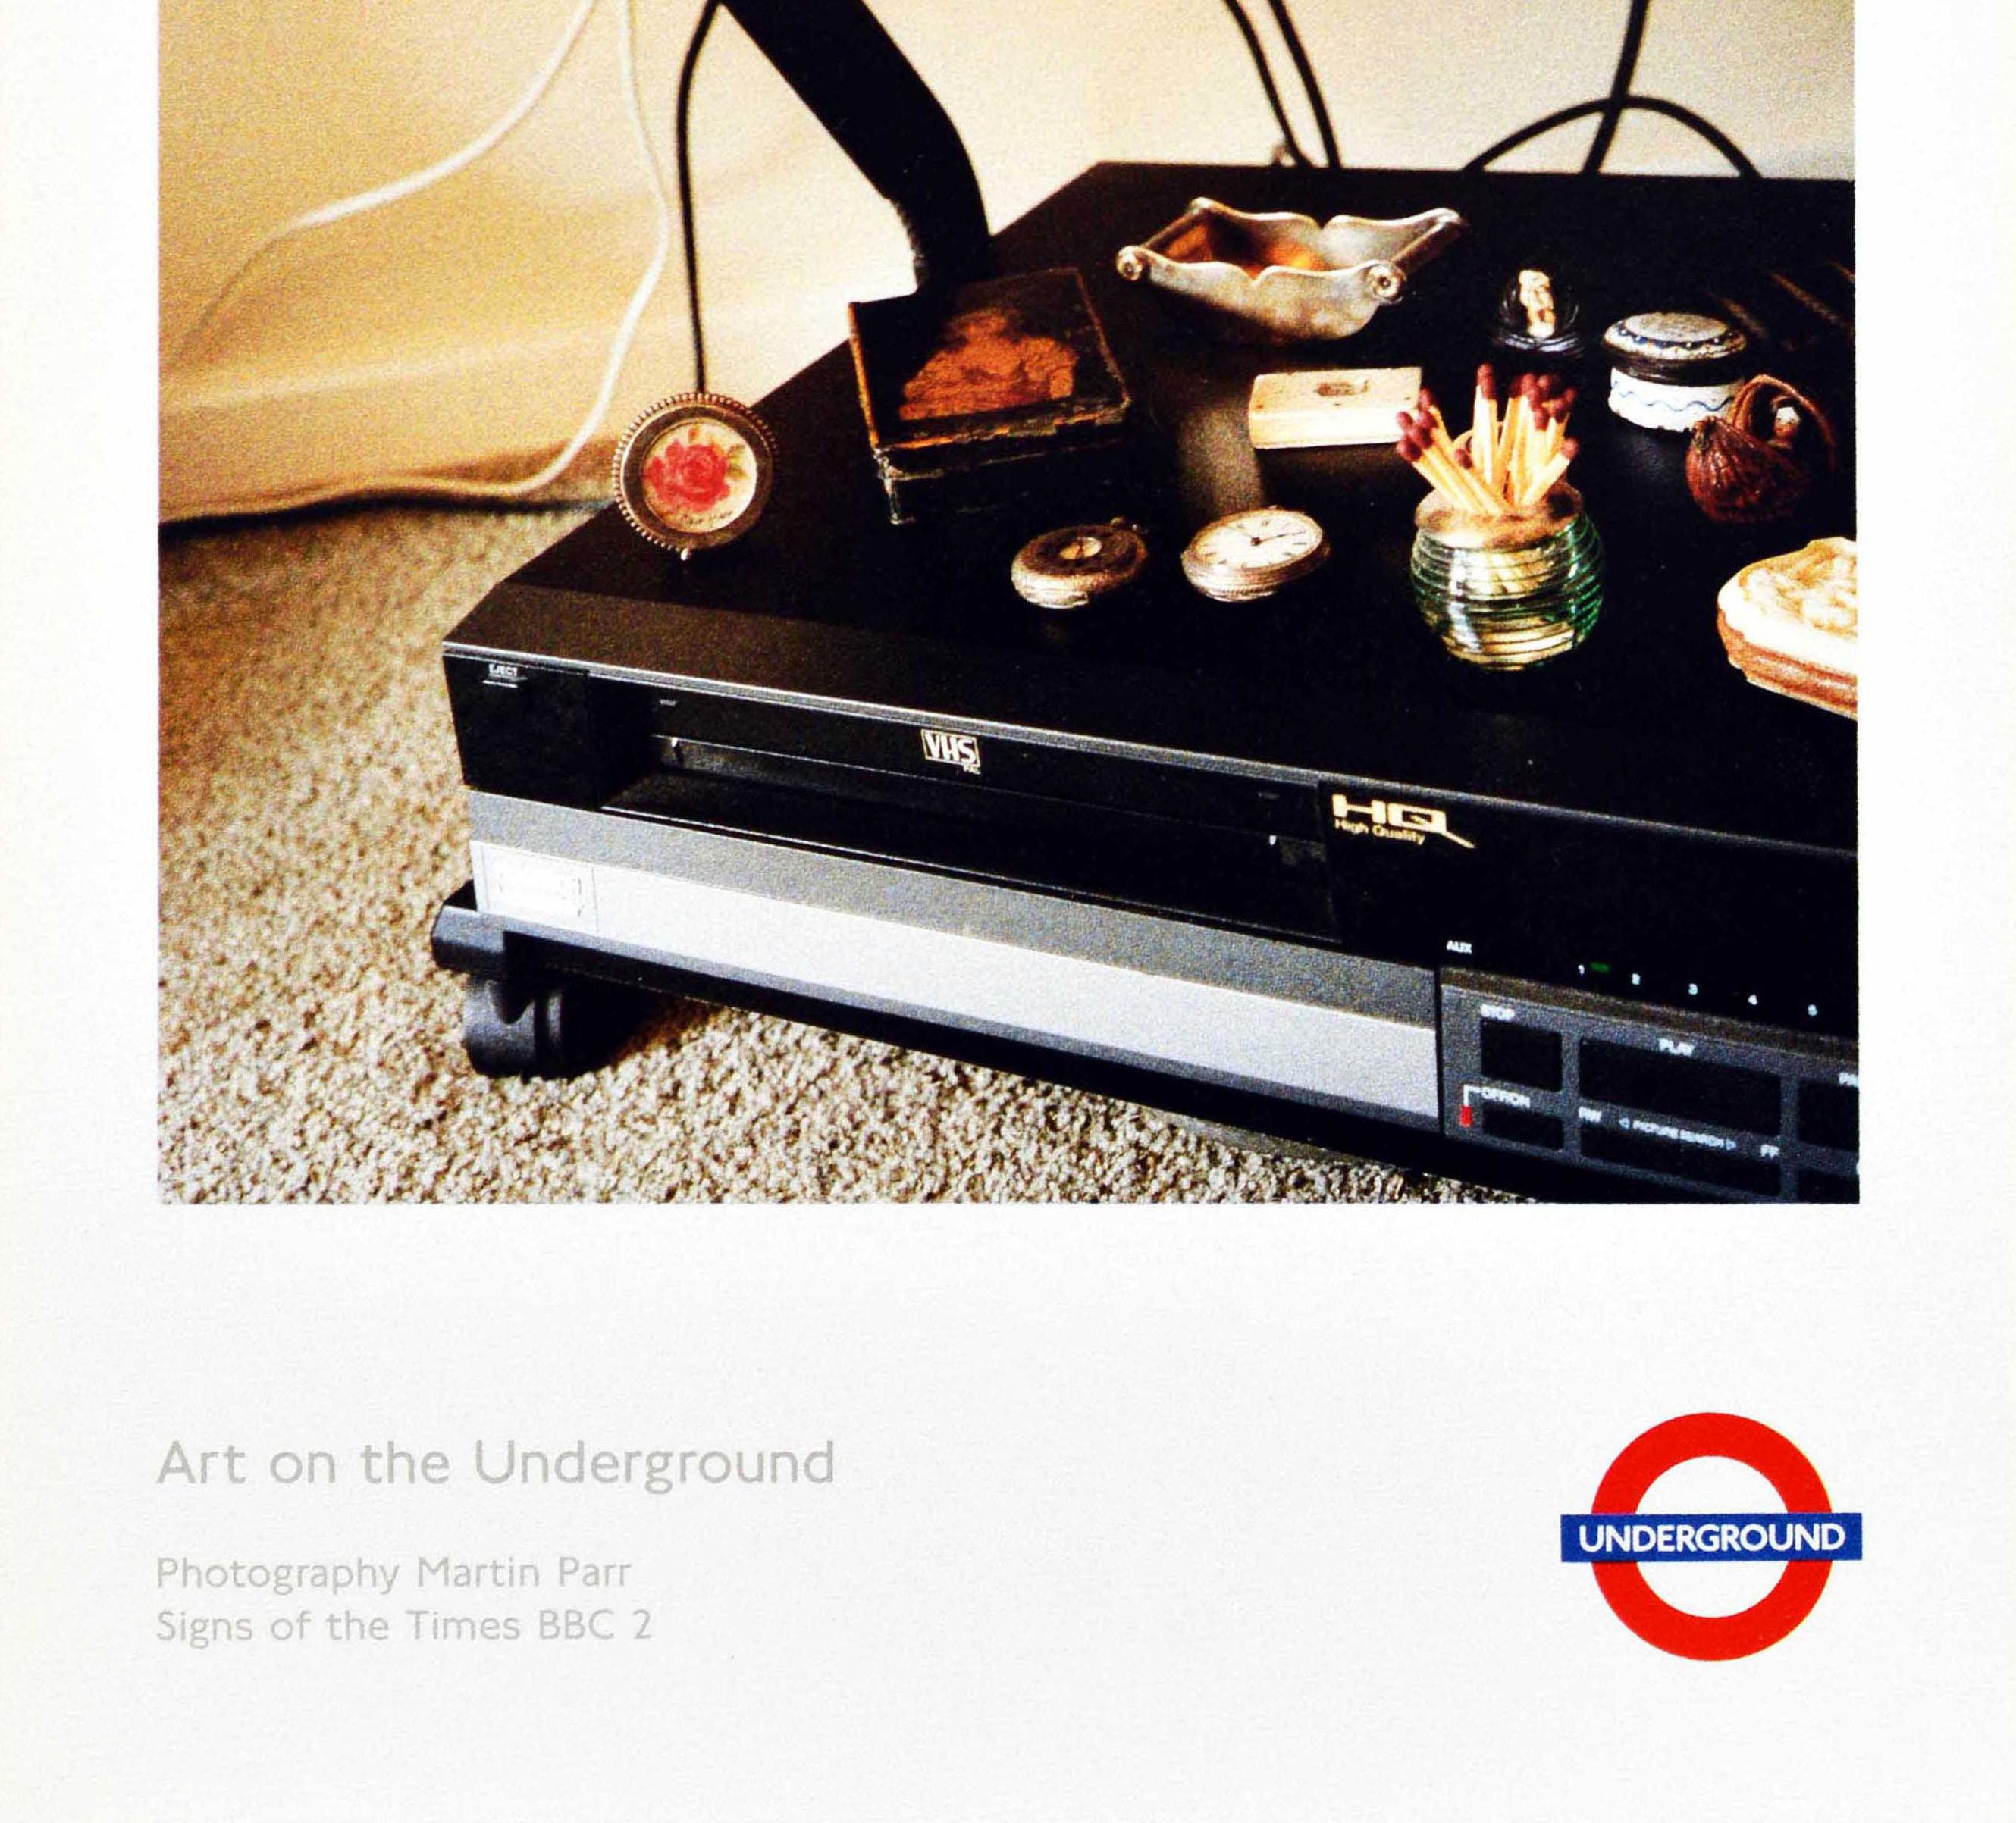 Original vintage London Underground poster featuring a photograph of a Sony television and ornaments on a VHS video recorder below it with the text reading: I think we are very lucky to have informed taste - with my position as a fine arts valuer.